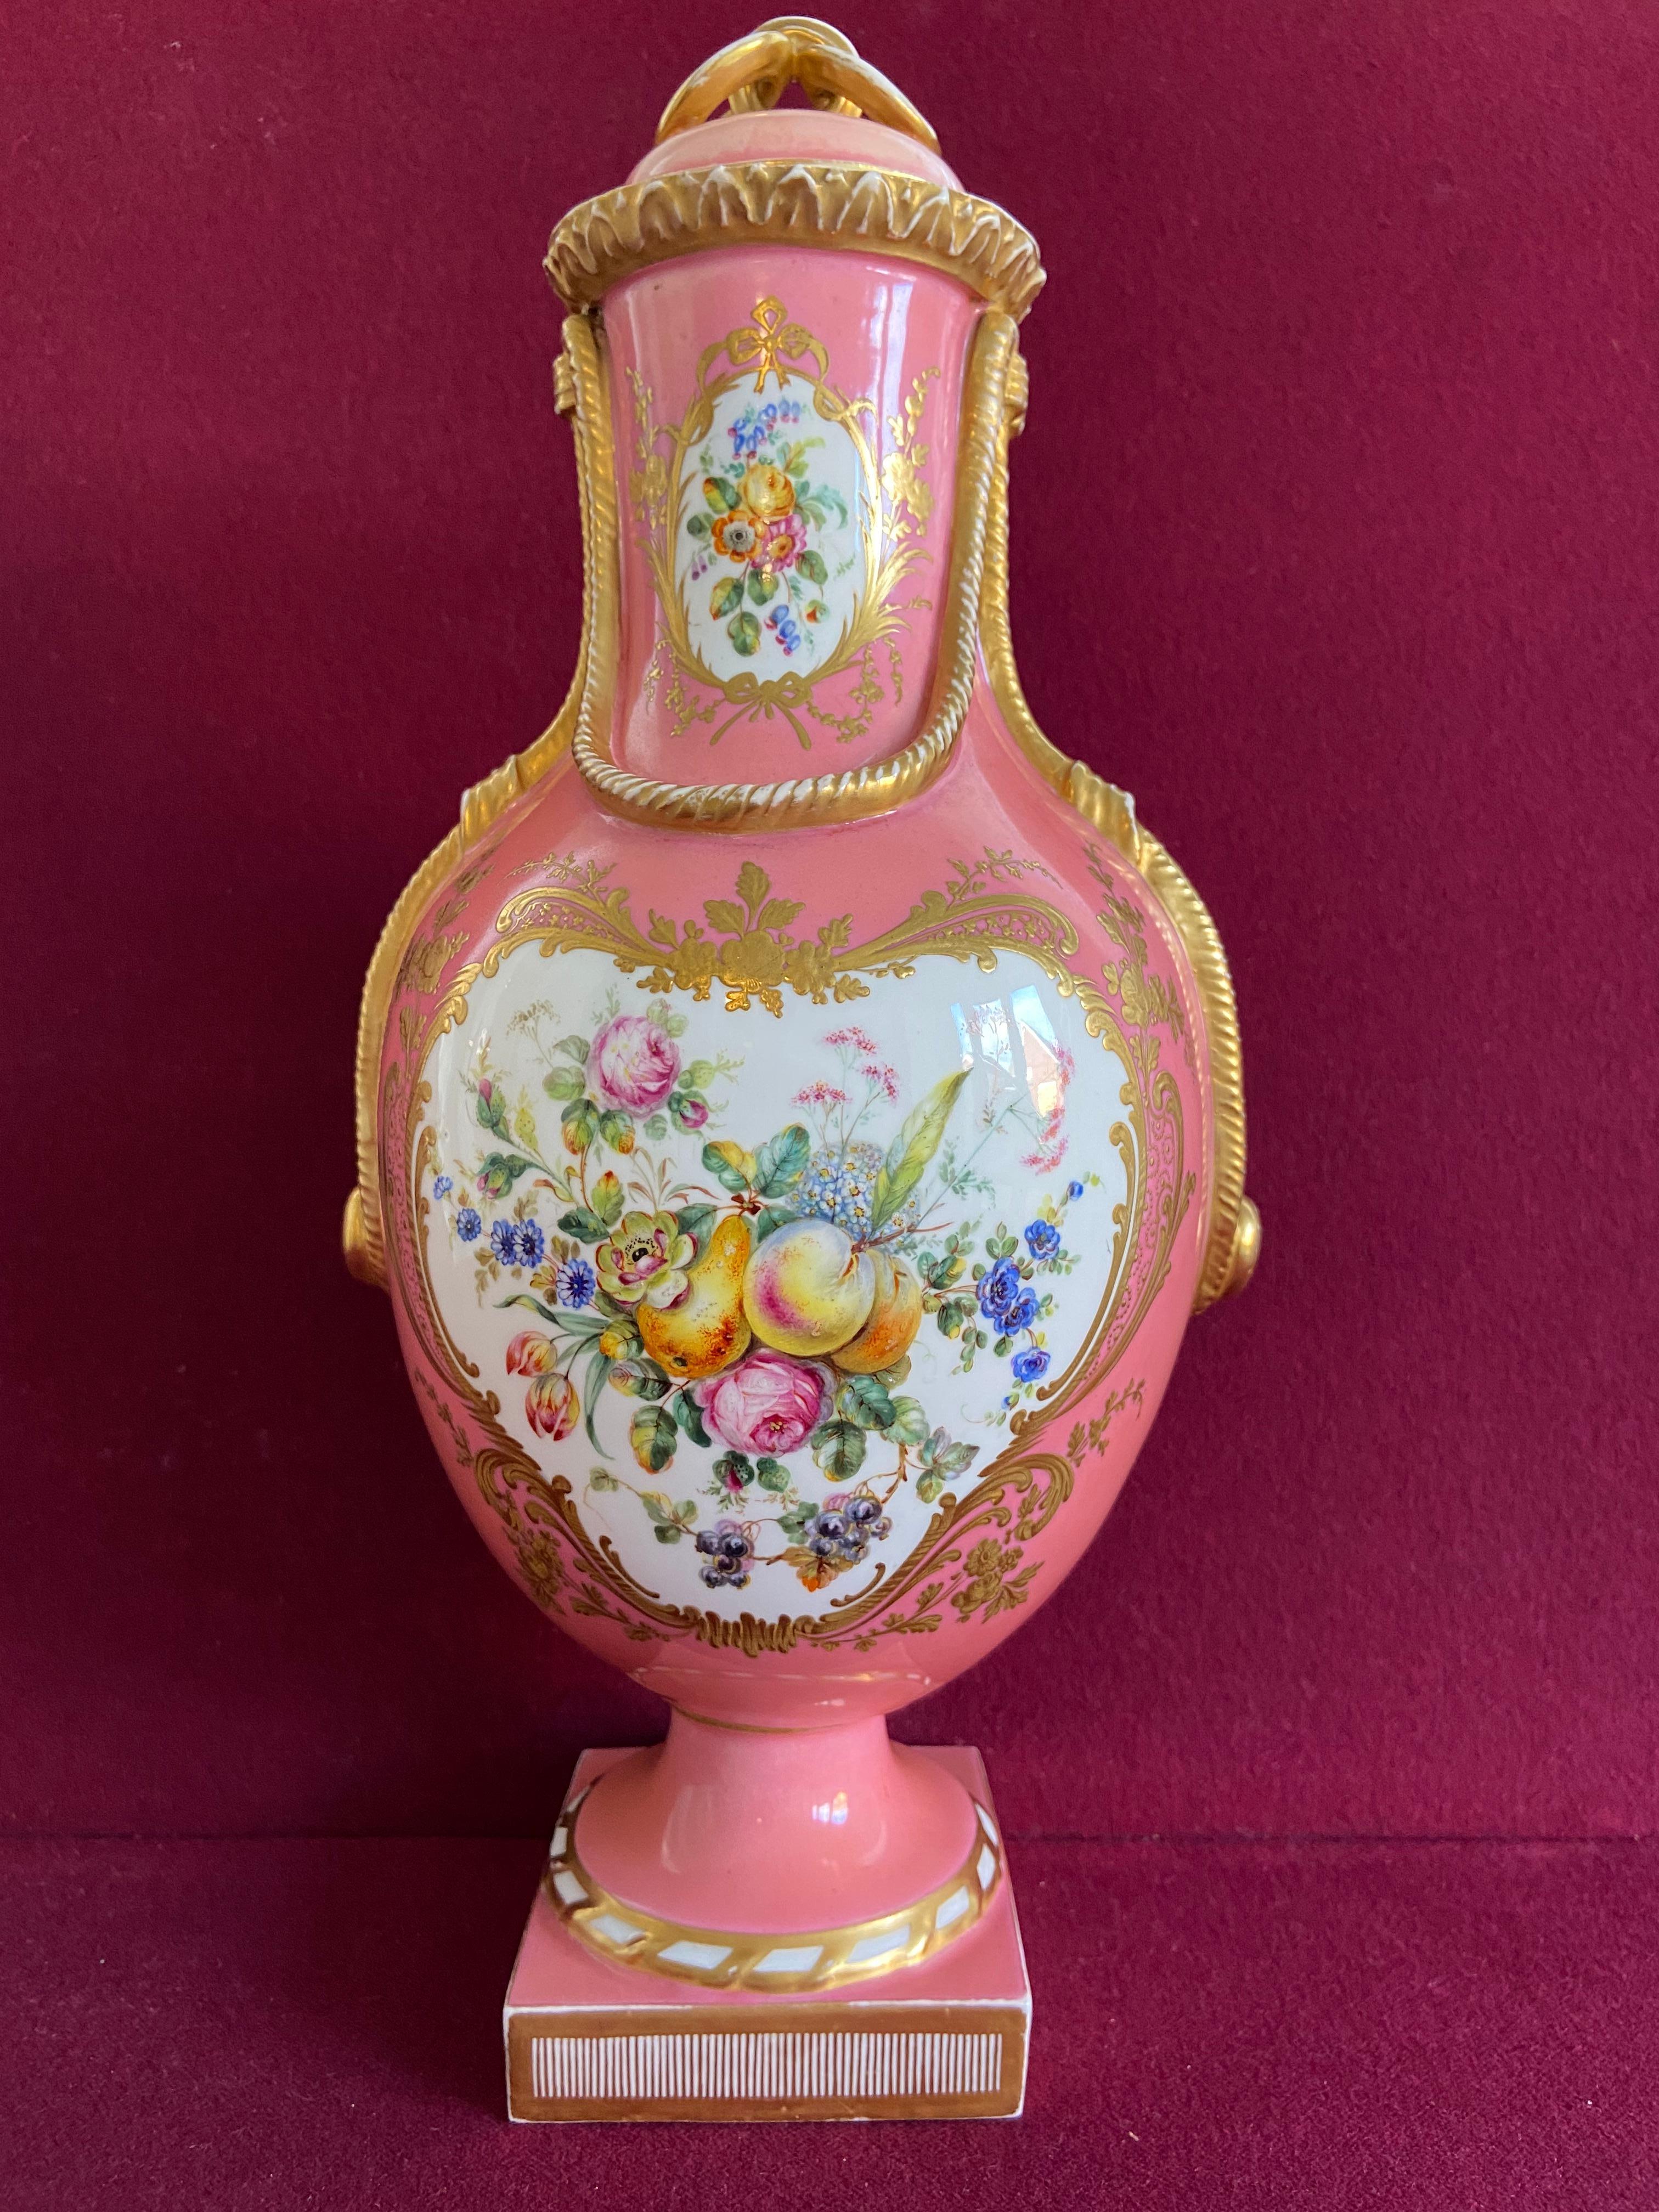 A large Coalport 'Coalbrookdale' porcelain vase c.1855. Decorated with finely painted panels of fruit and flowers by William Cook, reserved on a  'Rose du Barry' ground within elaborate raised and tooled gilt borders. The ‘Rose du Barry’ or ‘Rose du